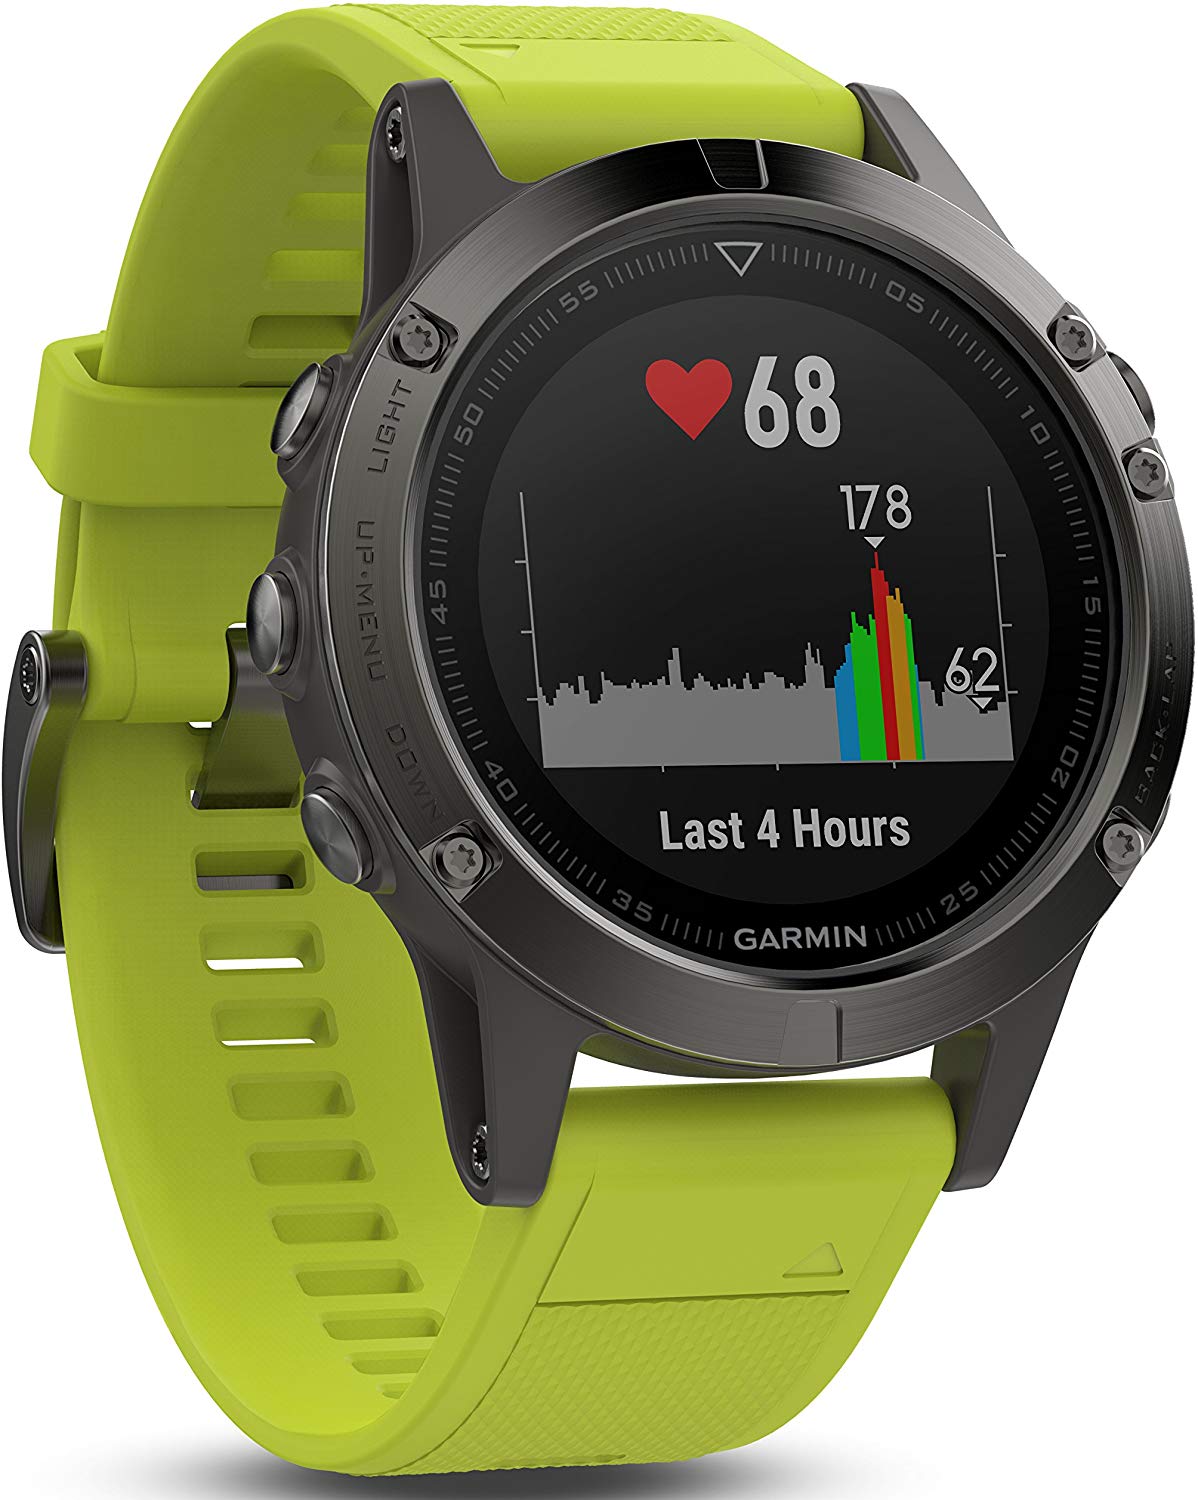 Garmin Fenix 5 Specifications, Features and Price - Smartwatch Charts